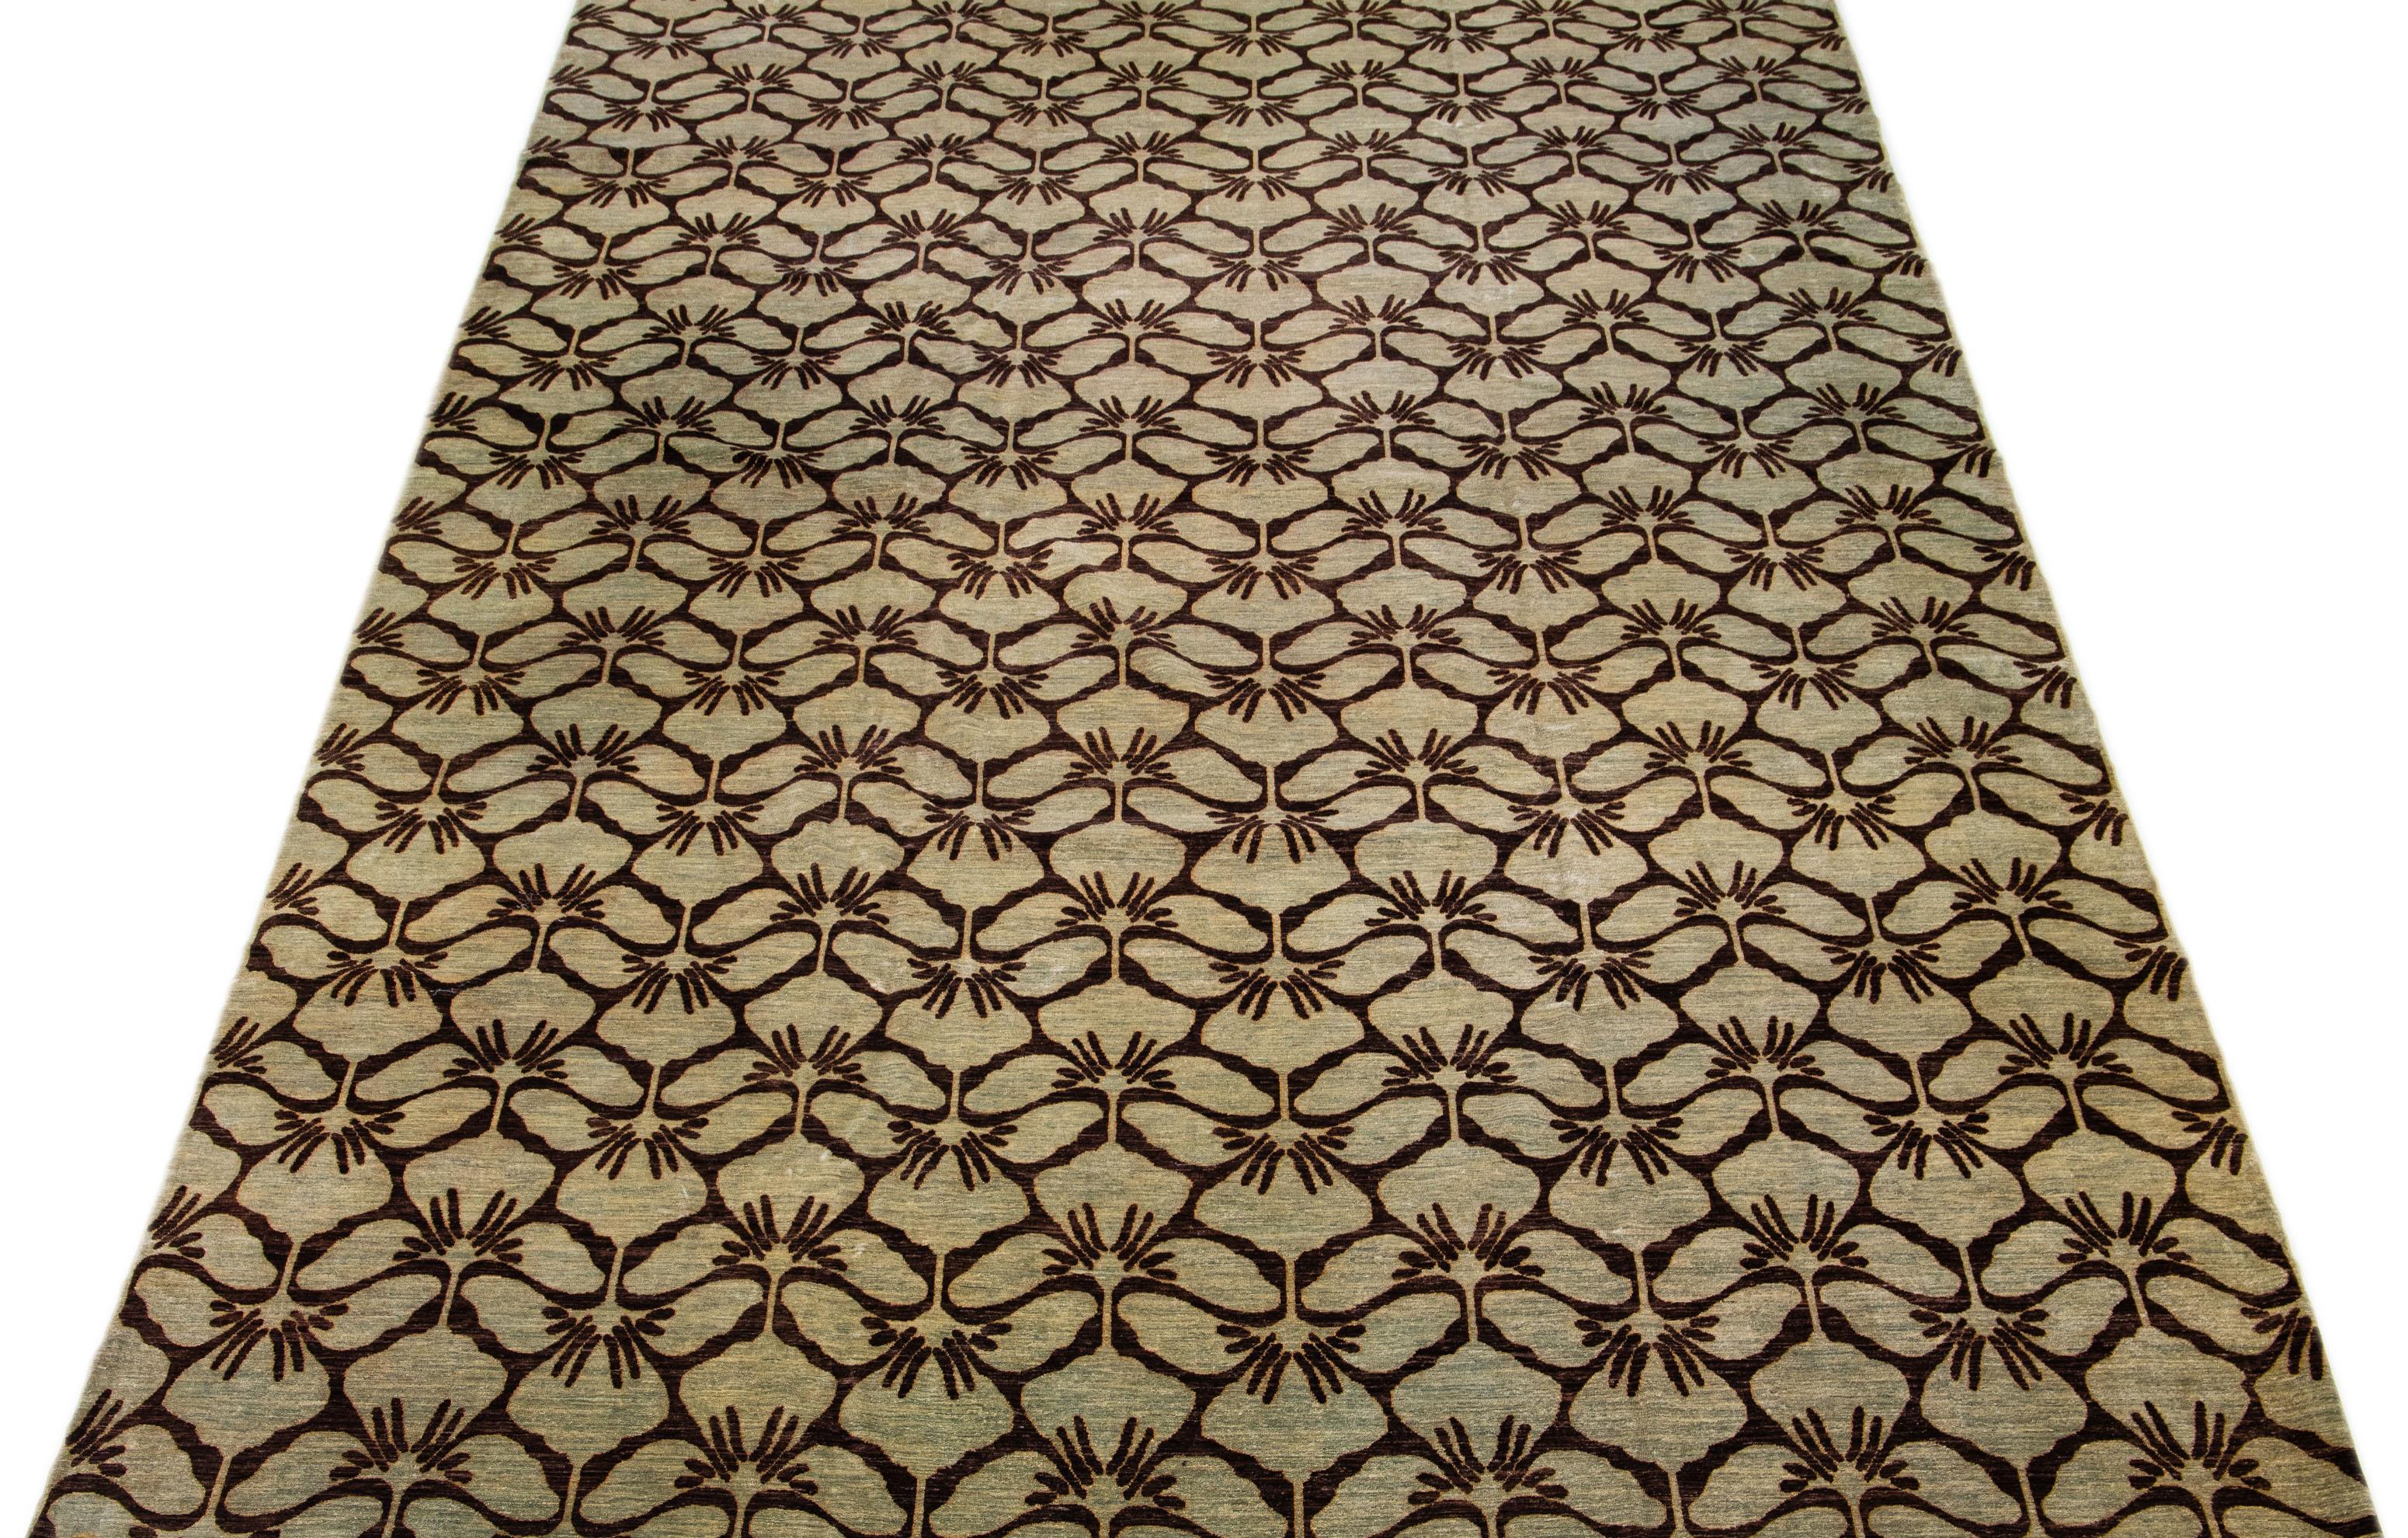 Beautiful modern hand-knotted wool rug with a tan field. This Transitional rug has a brown accent to create a modern, palmettes pattern design with a mid-century look. 

This rug measures: 13' x 20'1